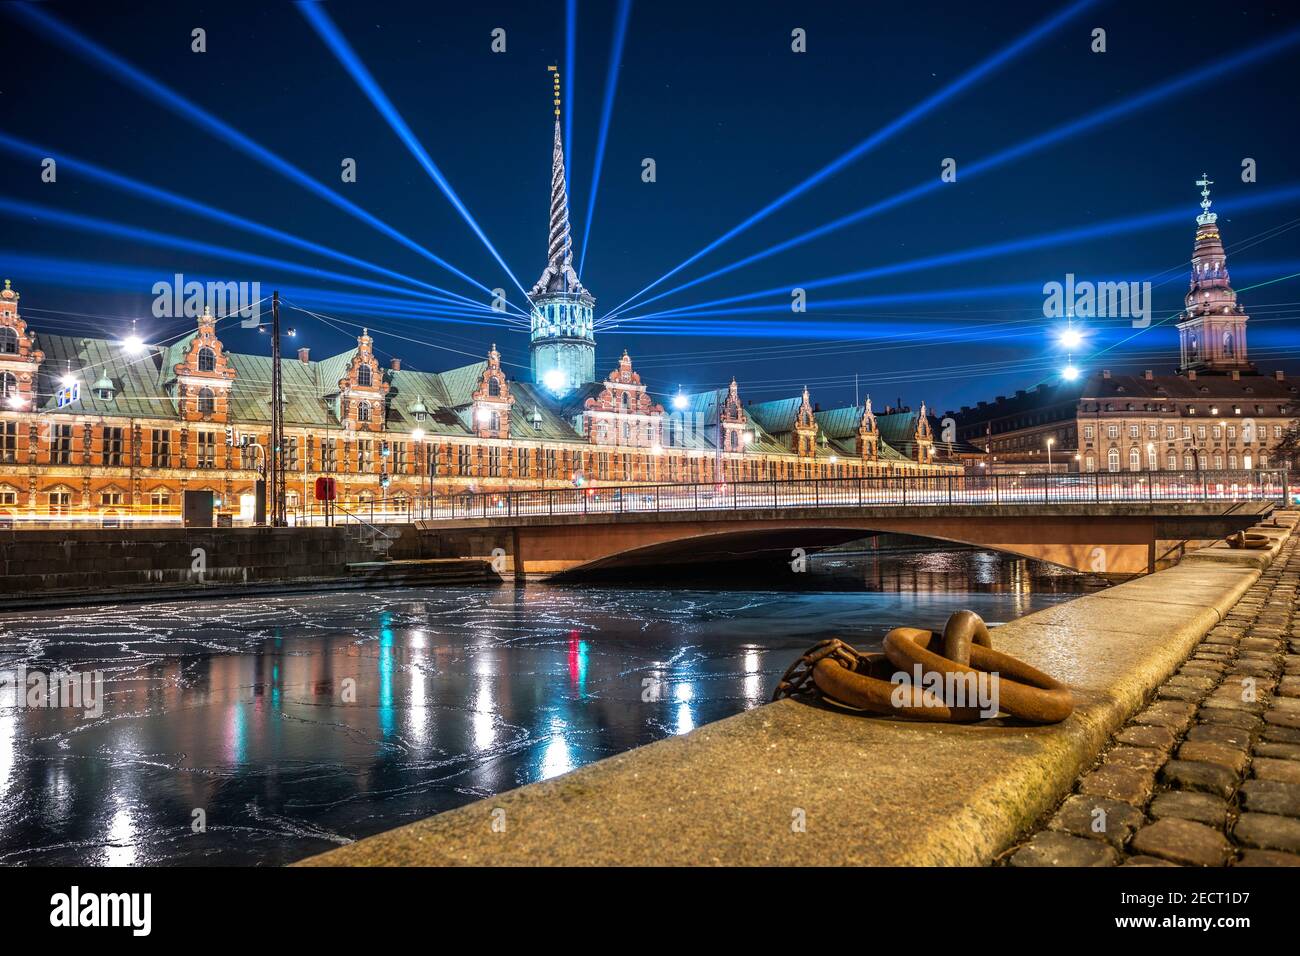 Copenhagen lights festival at night with lights mounted on Børsen tower and frozen canal, Denmark Stock Photo